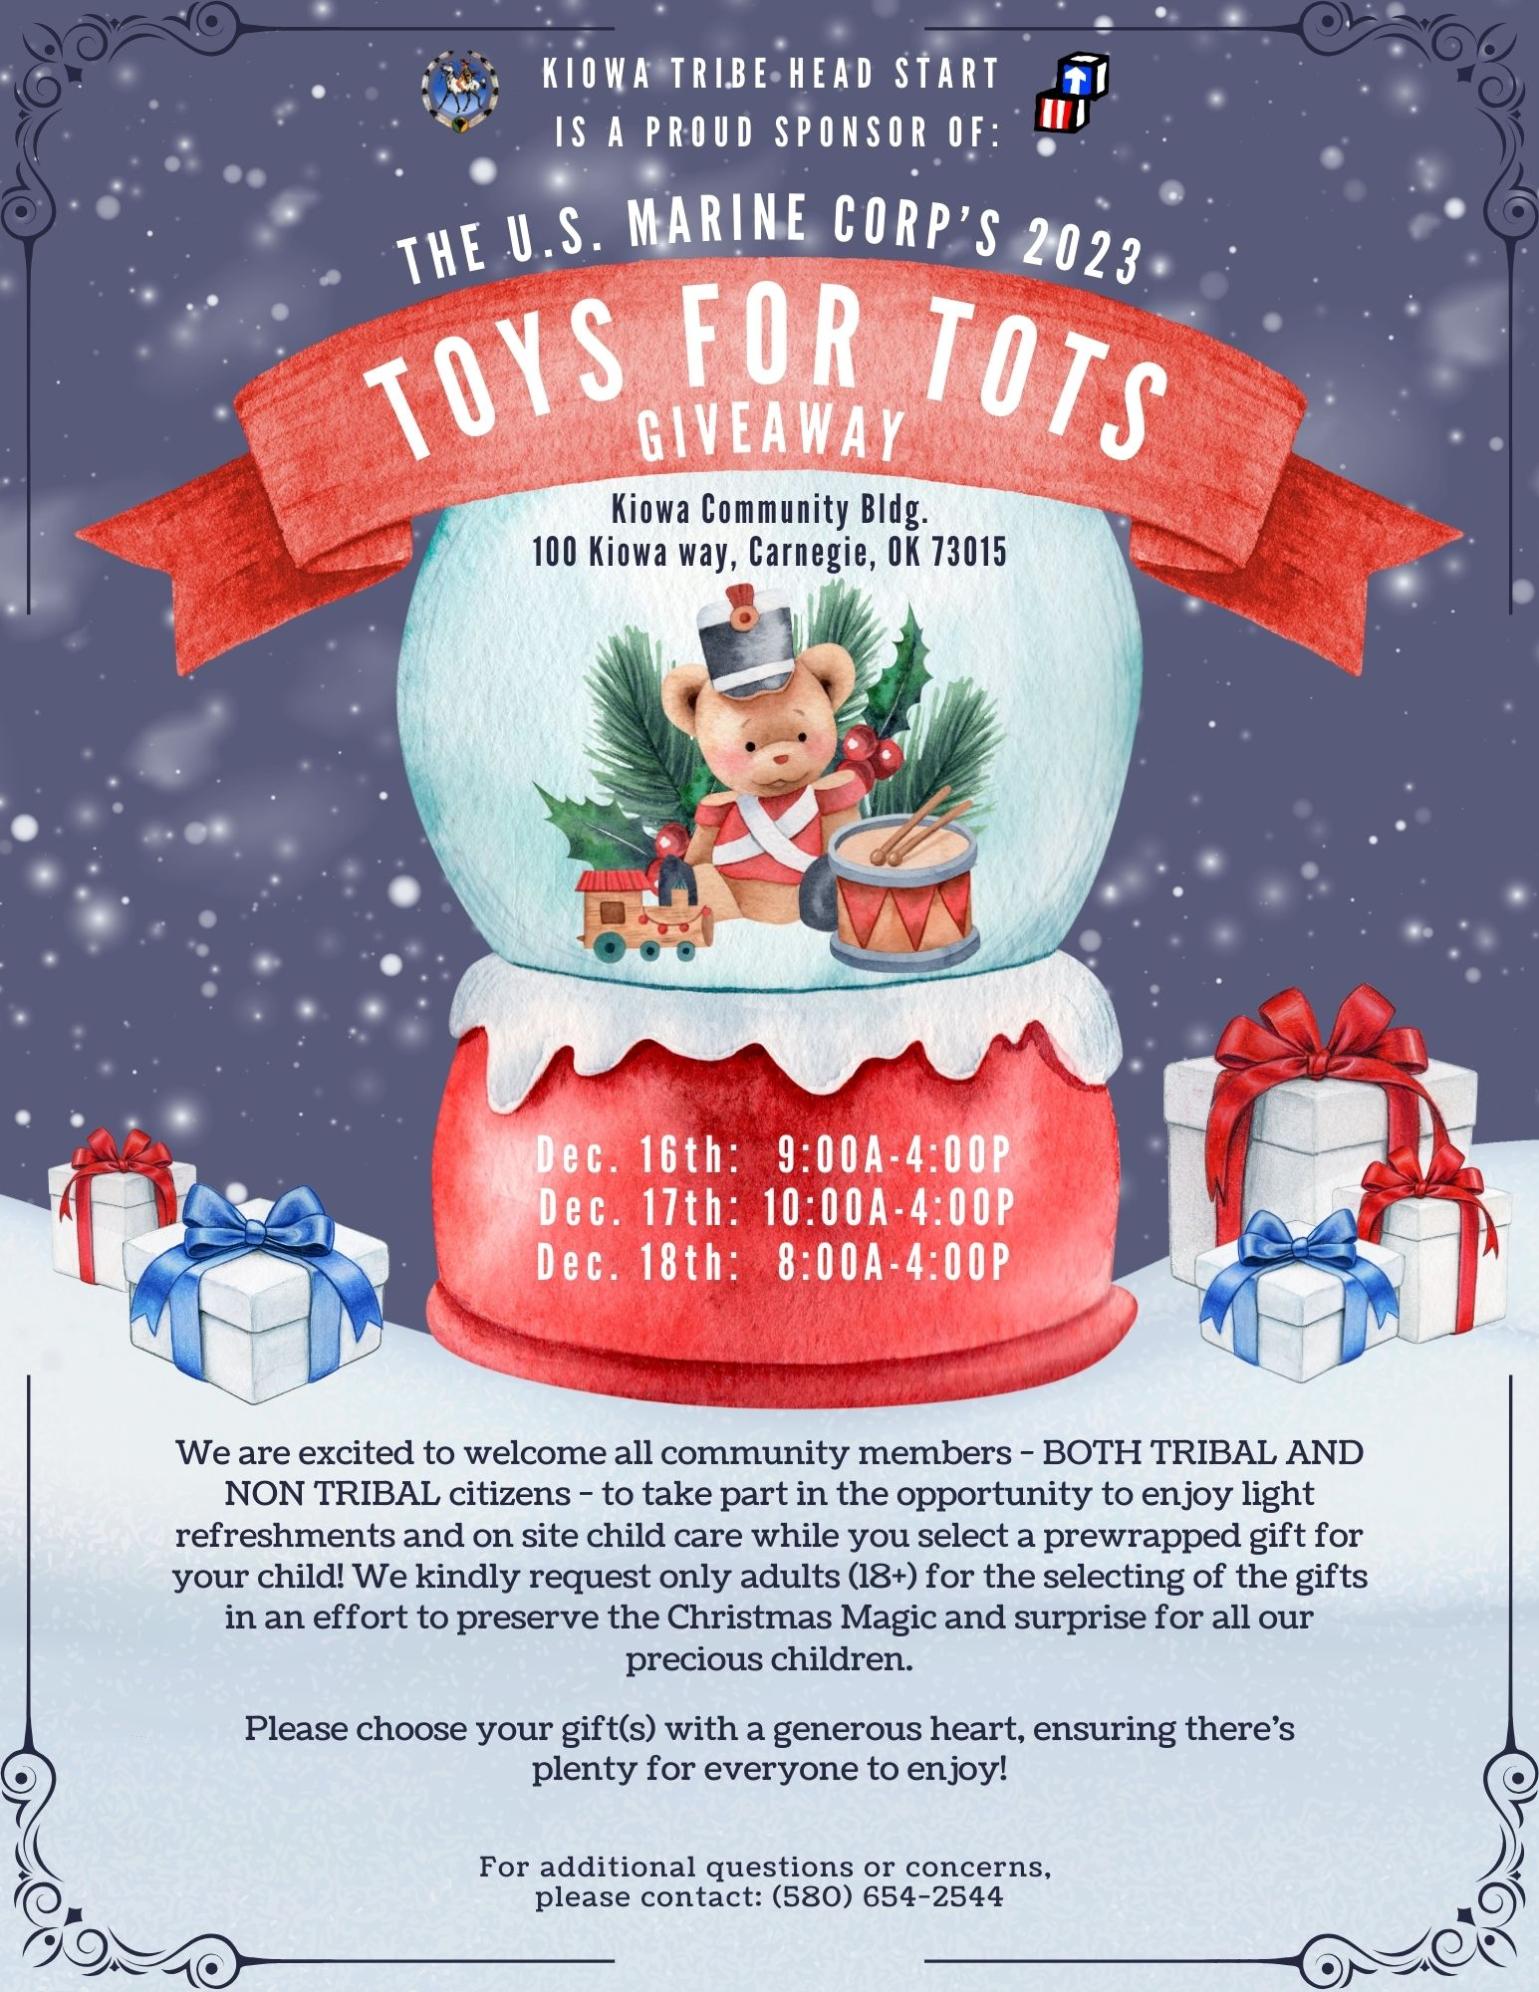 Toys for Tots Giveaway